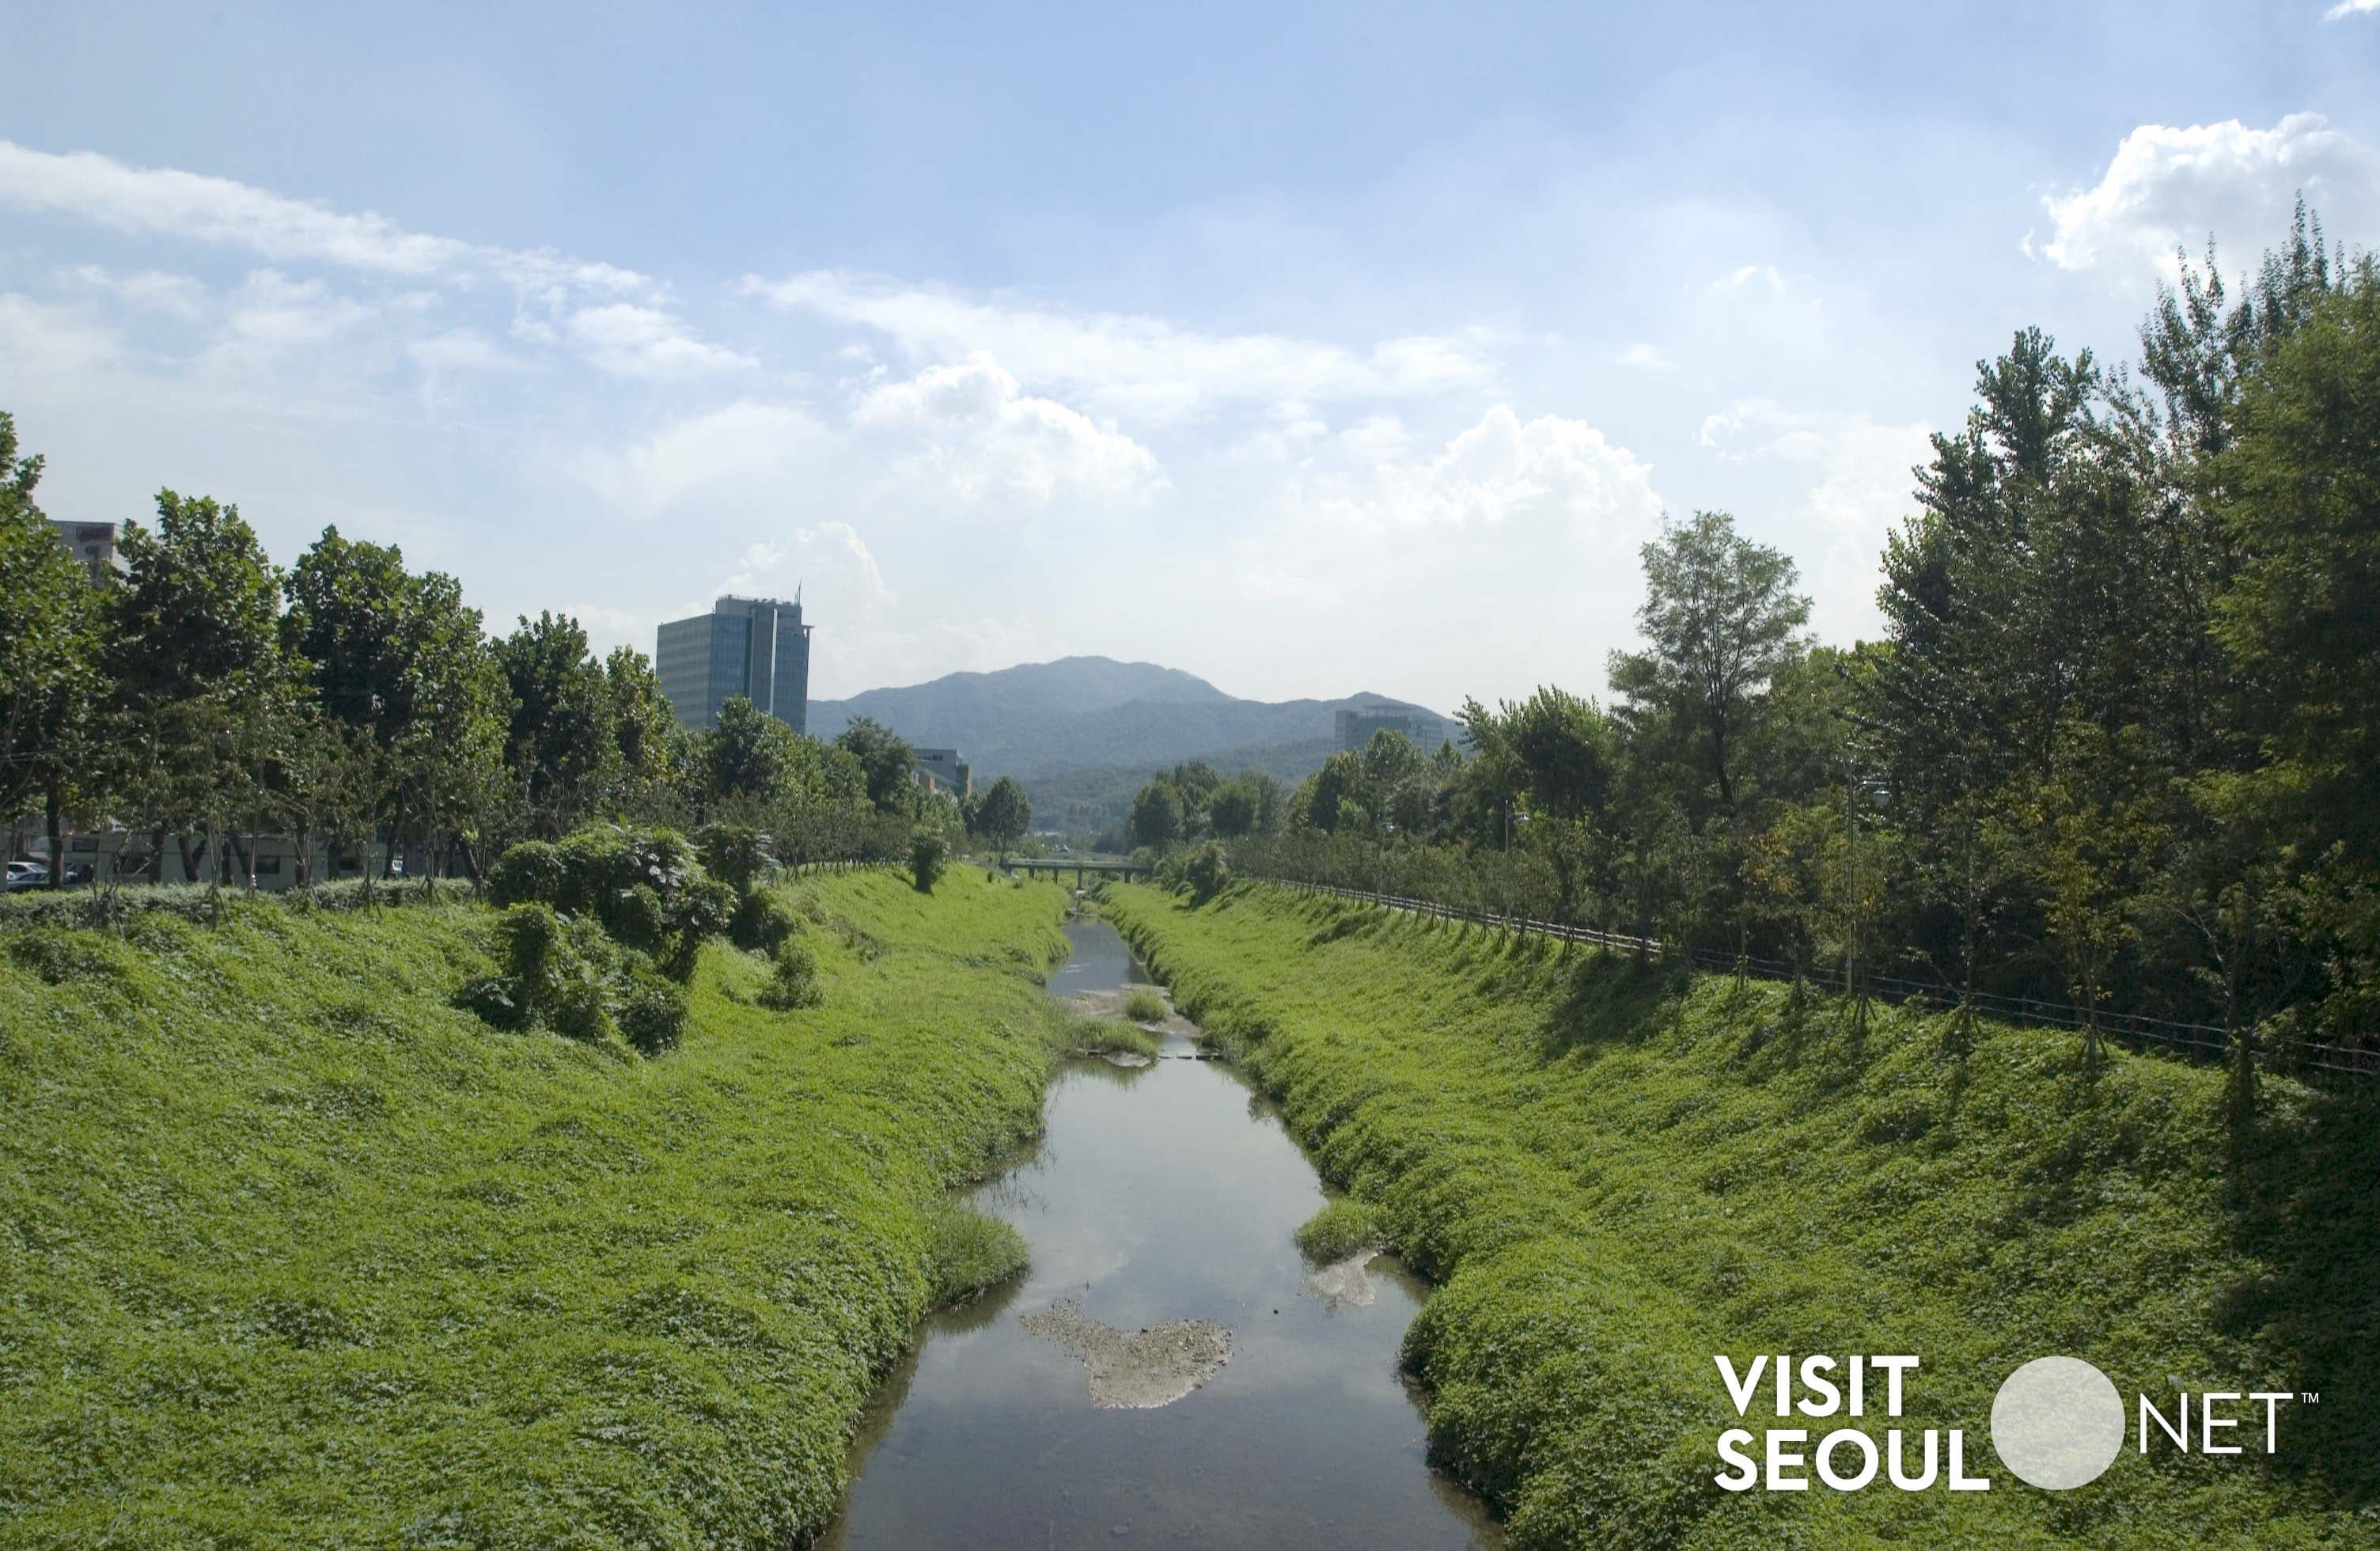 Maeheon Citizen's Forest (Yangjae Citizens' Forest)1 : The forest with grass and trees on both sides of the stream